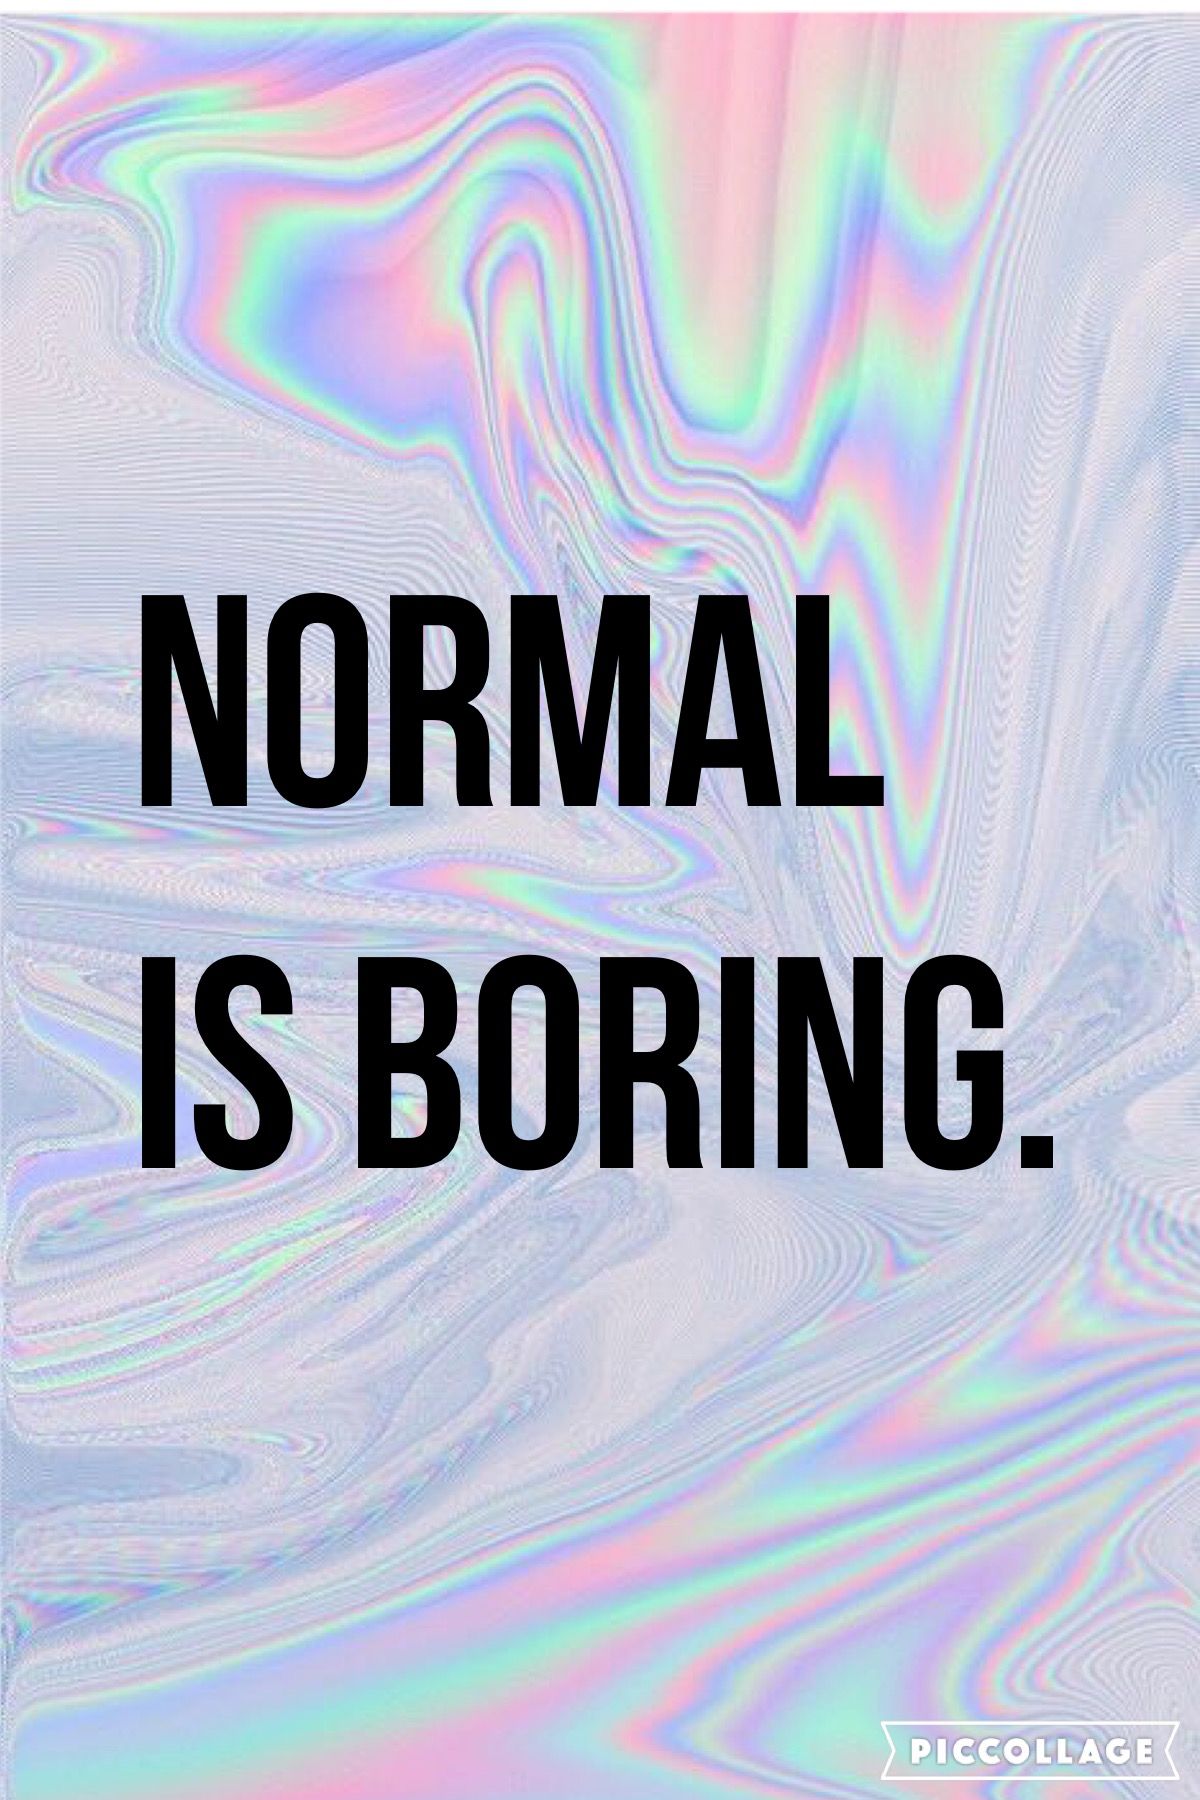 NORMAL IS BORING. Be you. Bored wallpaper, Normal is boring, Creative wall decor